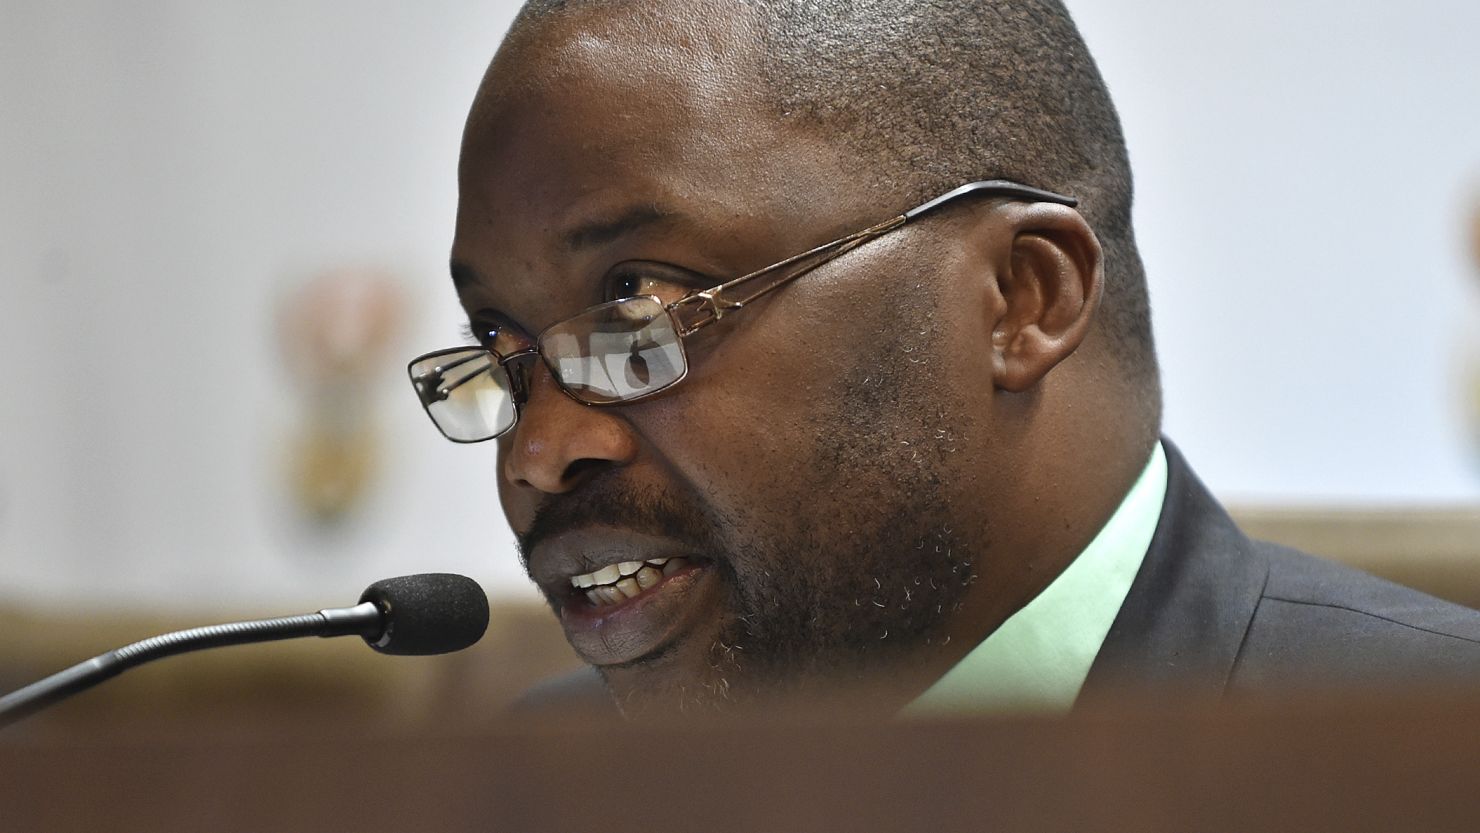 South Africa's minister of justice and correctional services, Michael Masutha, speaks to the press in Pretoria, South Africa, Friday, Oct. 21, 2016. Masutha said South Africa will soon submit a bill in parliament to withdraw from the International Criminal Court making the country the second this week, after Burundi, to move to leave the tribunal that pursues the world's worst atrocities. (AP Photo)